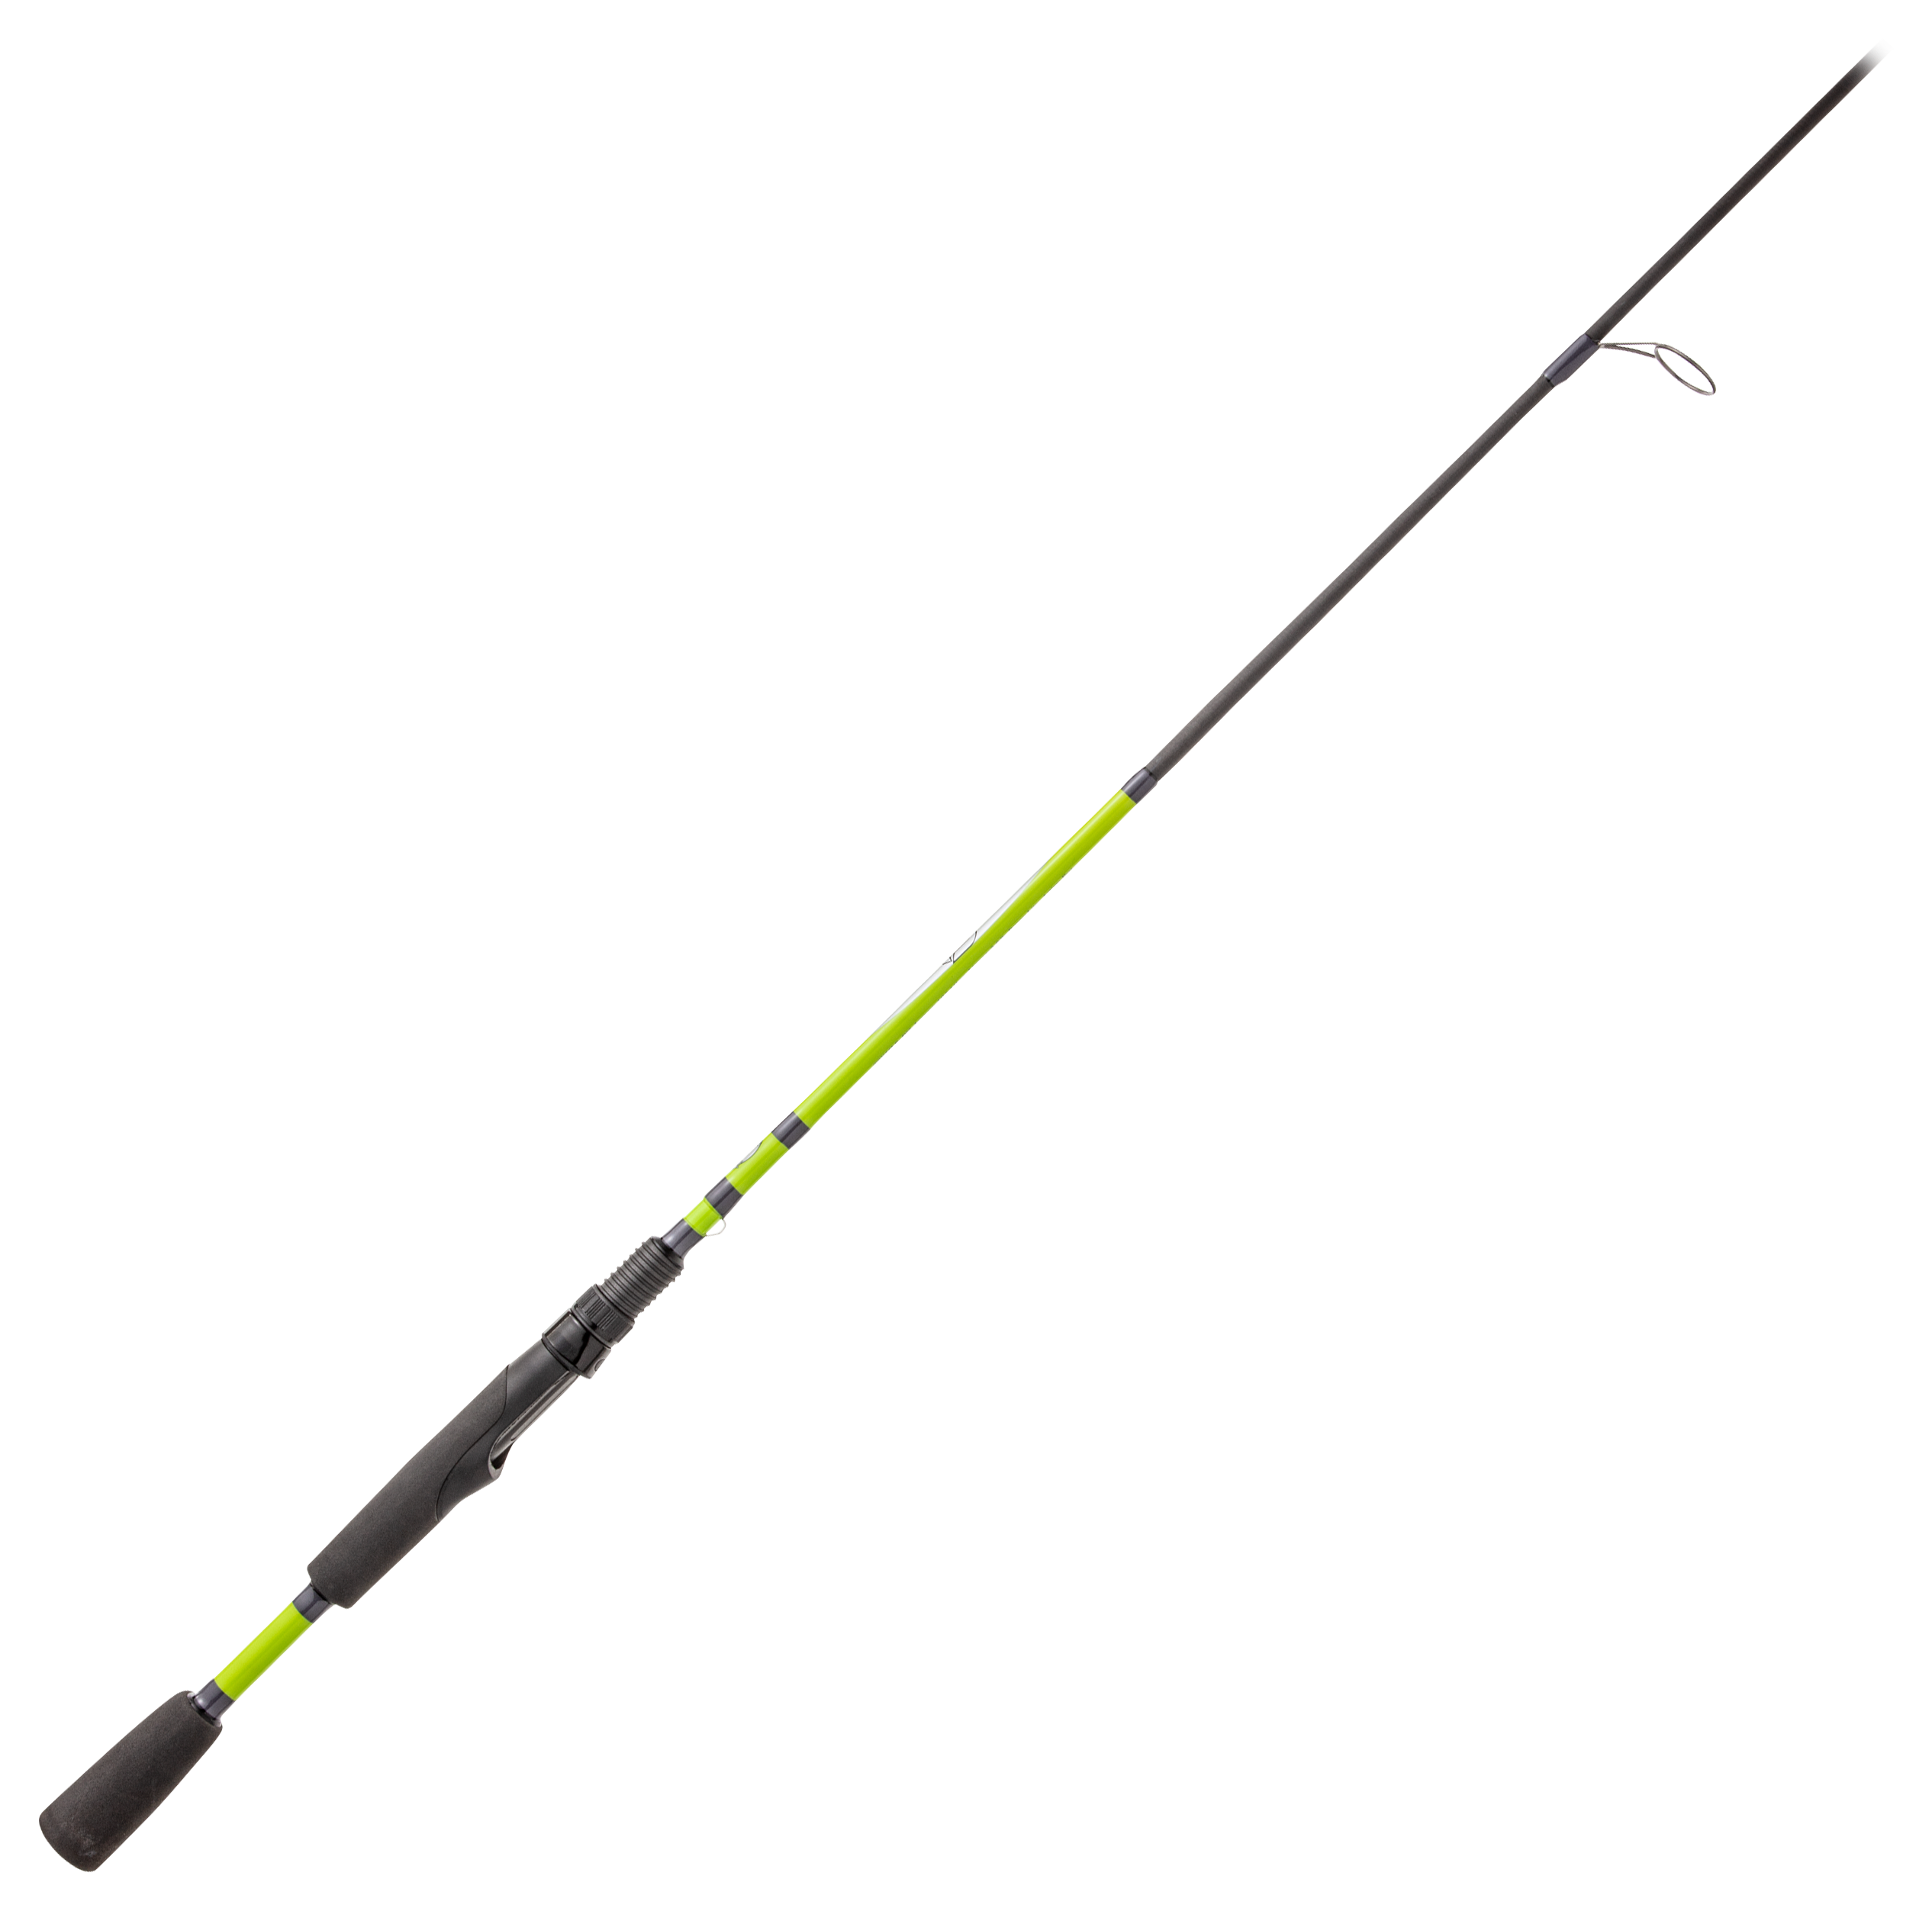 Bass Pro Shops Tourney Special Spinning Rod - 6' - Light - B - 2 Pieces